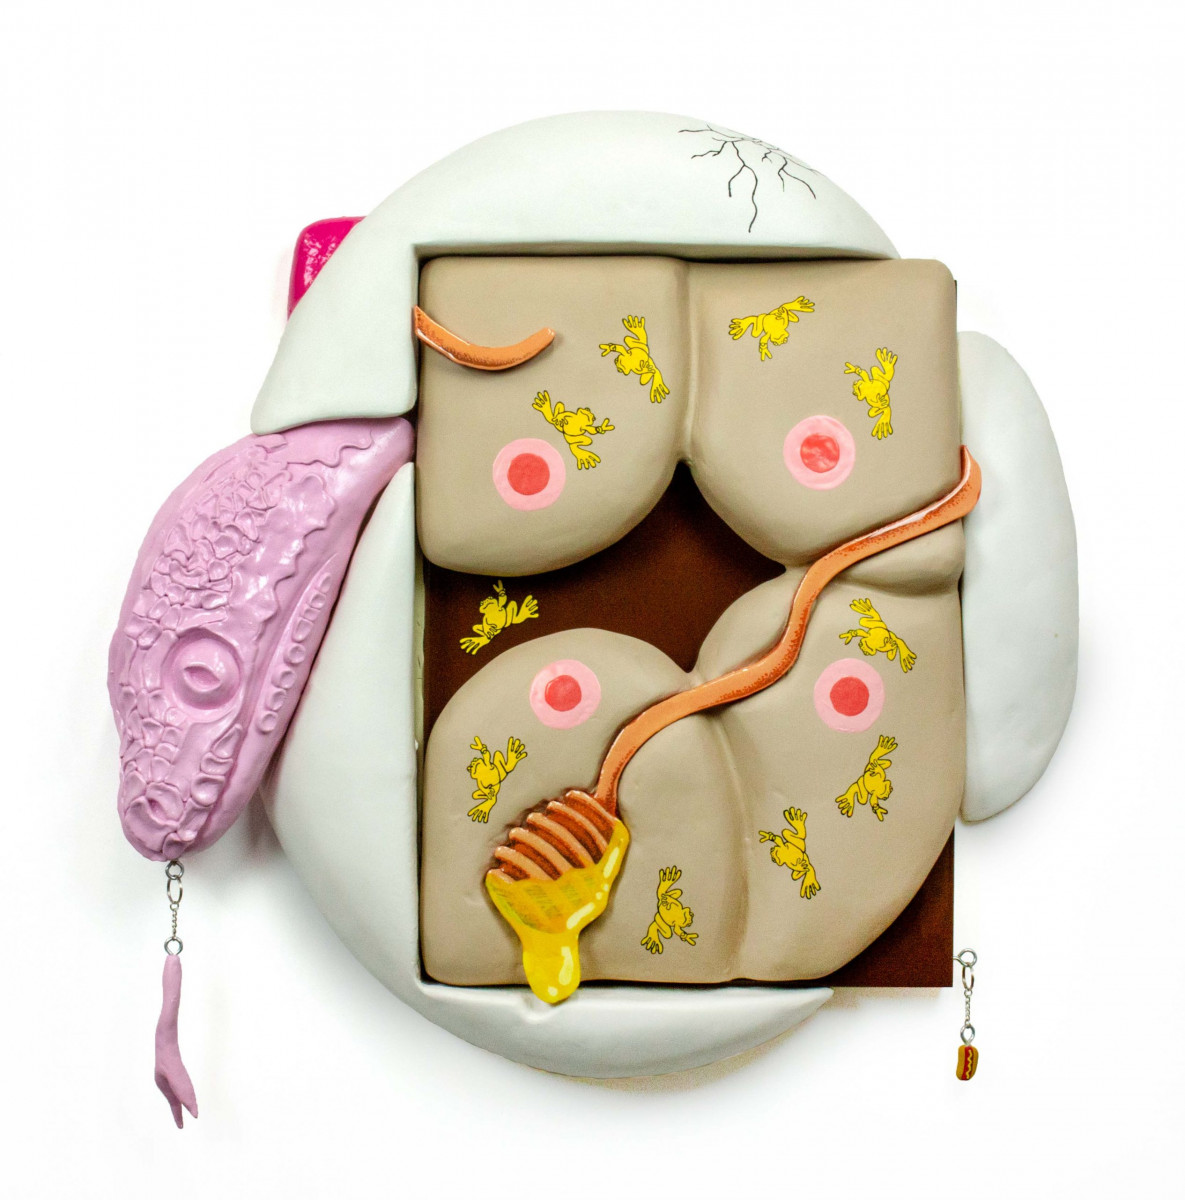 Mike Chattem. <em>Sun Kissed Flesh in 1080p</em>, 2023. Acrylic, spray paint, resin clay, epoxy resin, polystyrene, wood panel and key chain components, 35 x 34 x 5 inches (88.9 x 86.4 x 12.7 cm)